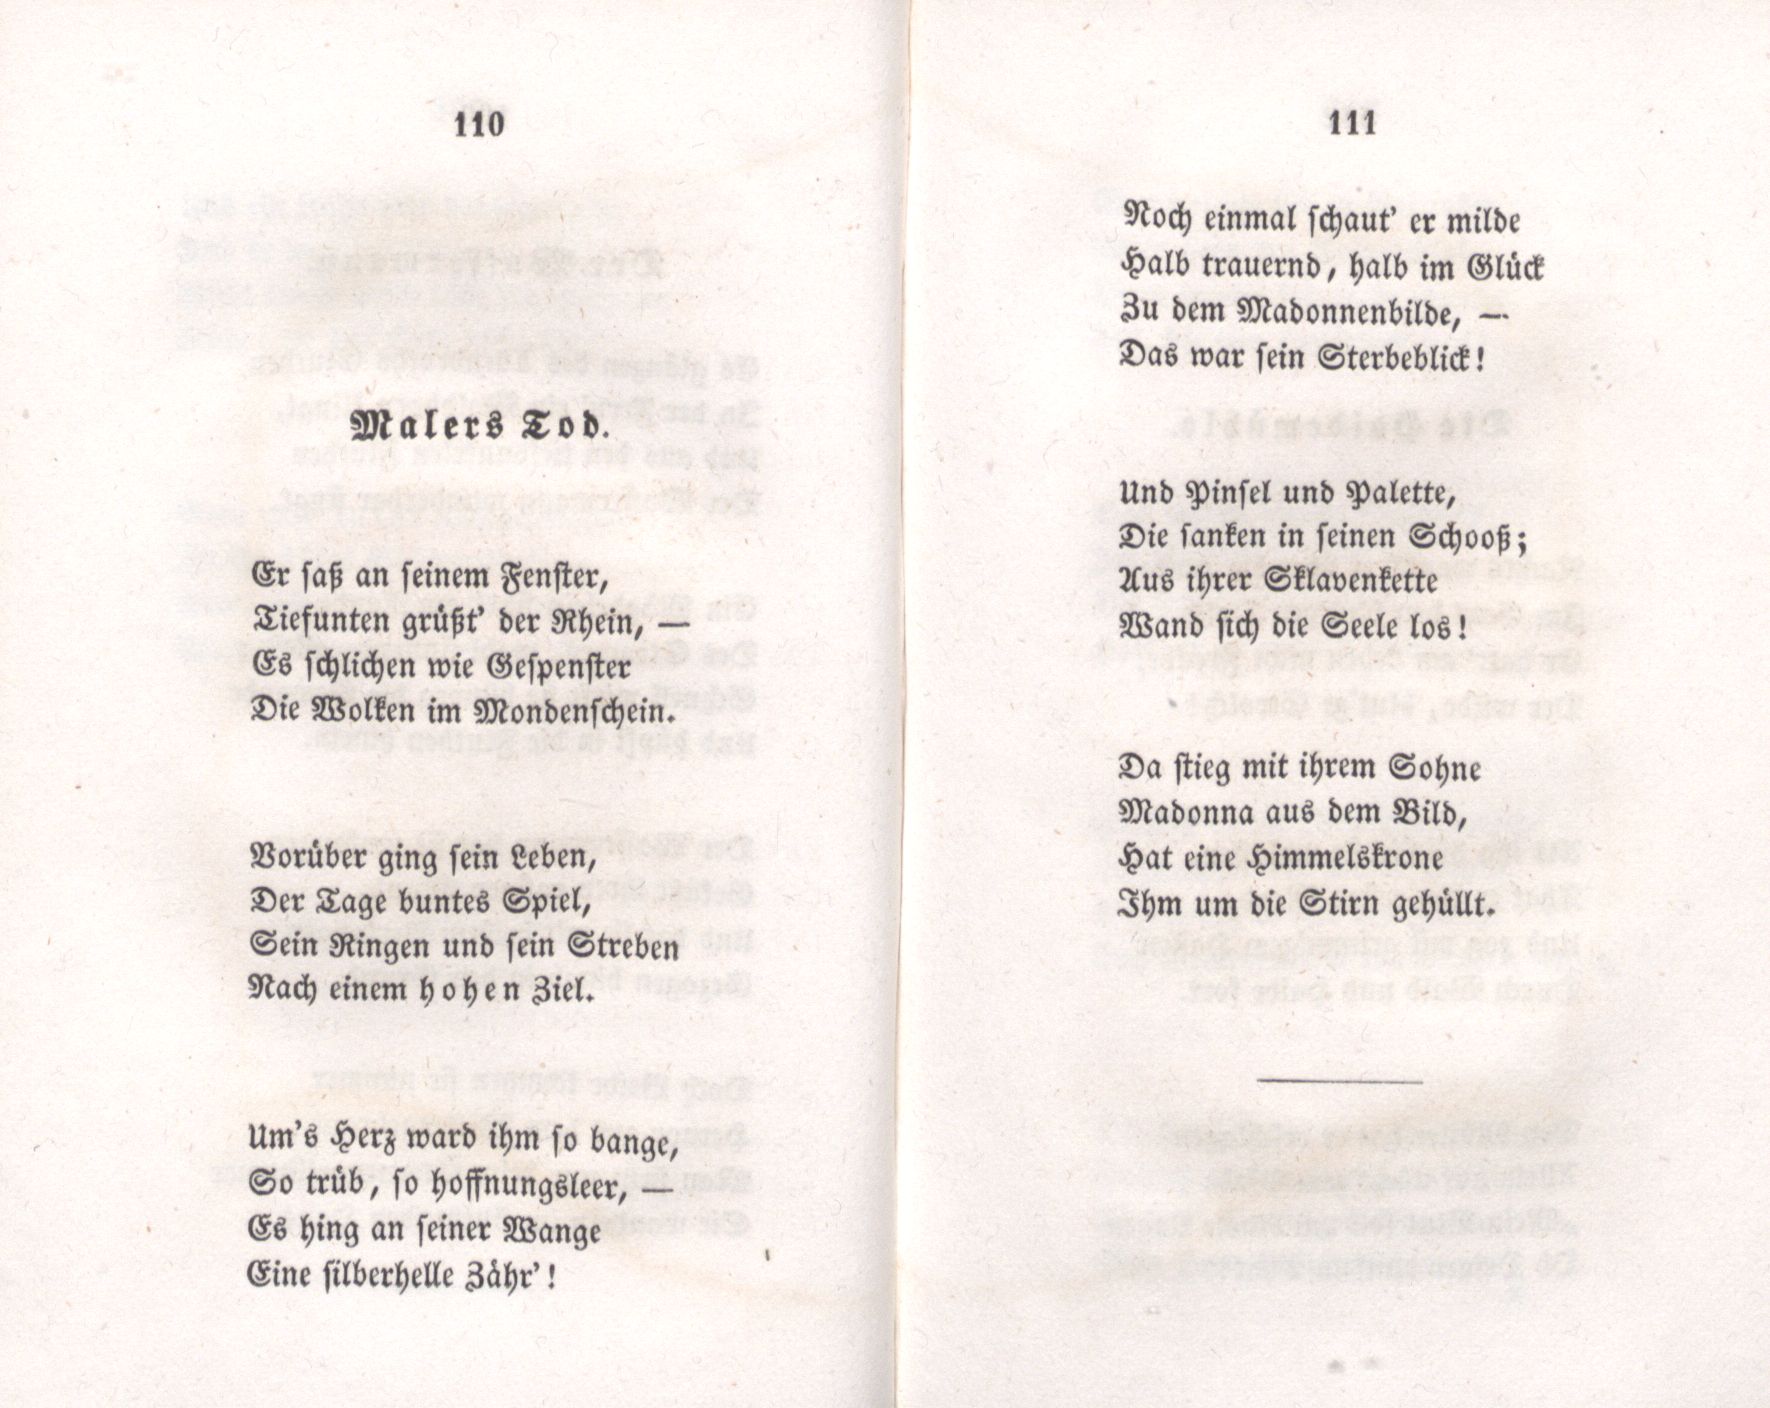 Malers Tod (1849) | 1. (110-111) Haupttext